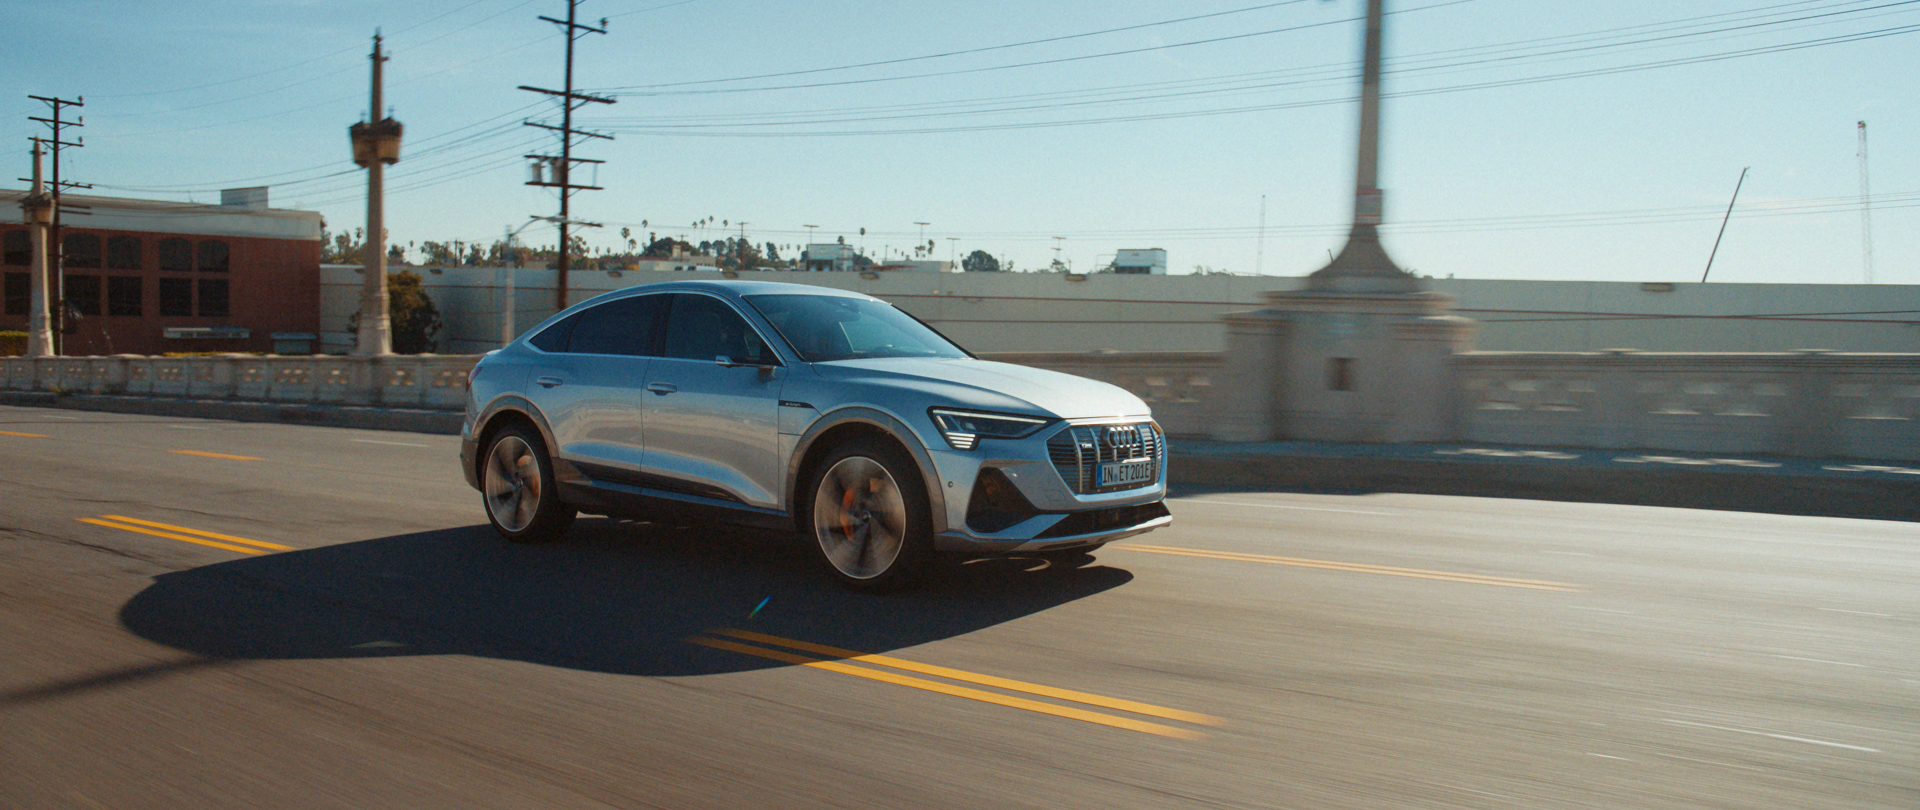 Audi Super Bowl ad “Frozen” song, electric vehicles, and climate change